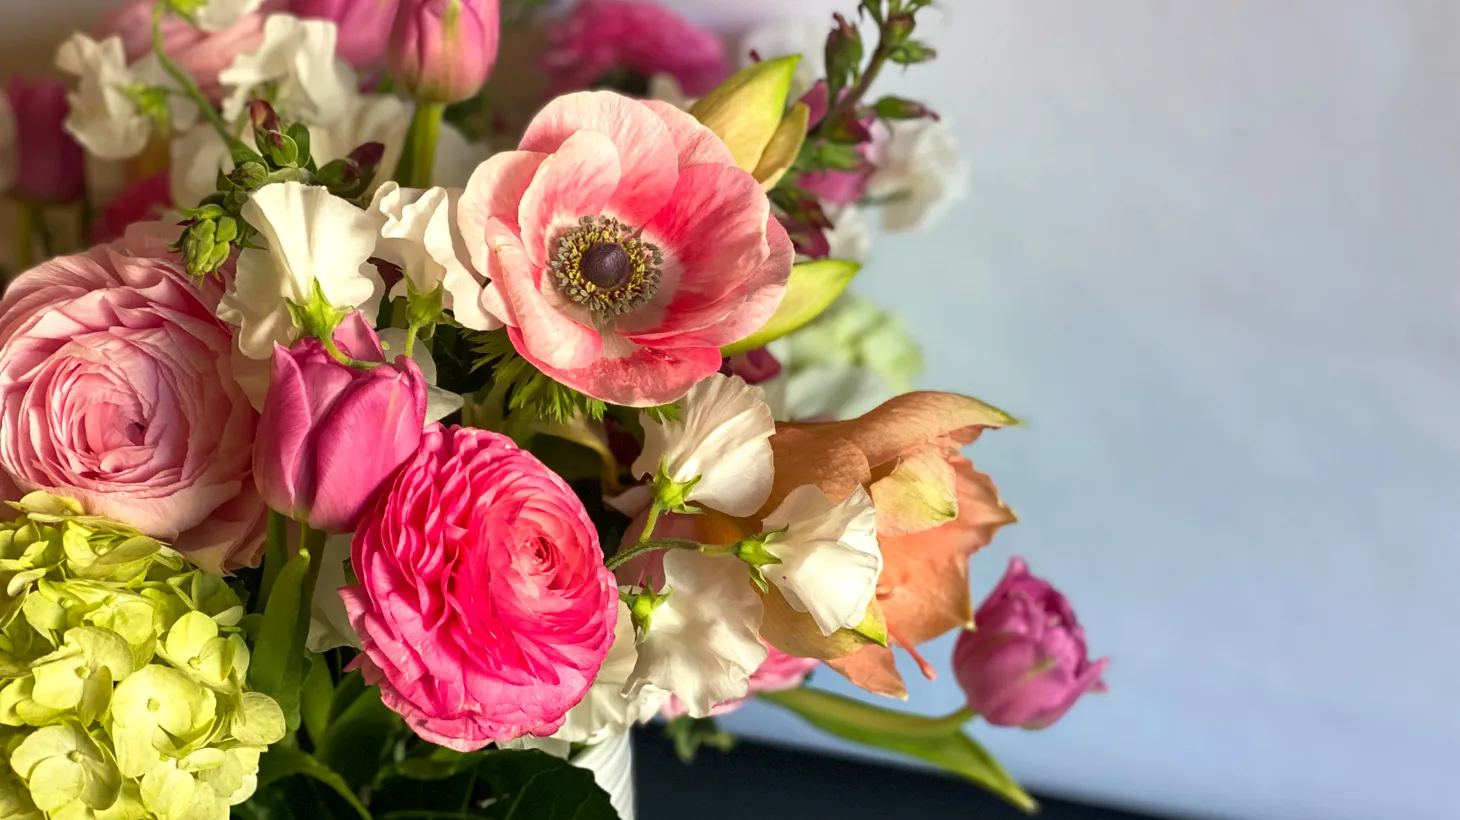 Businesses are now sometimes paying twice as much for the flowers they buy, but you can’t charge customers double, so it’s a tough balancing act, says florist Tracey Morris.